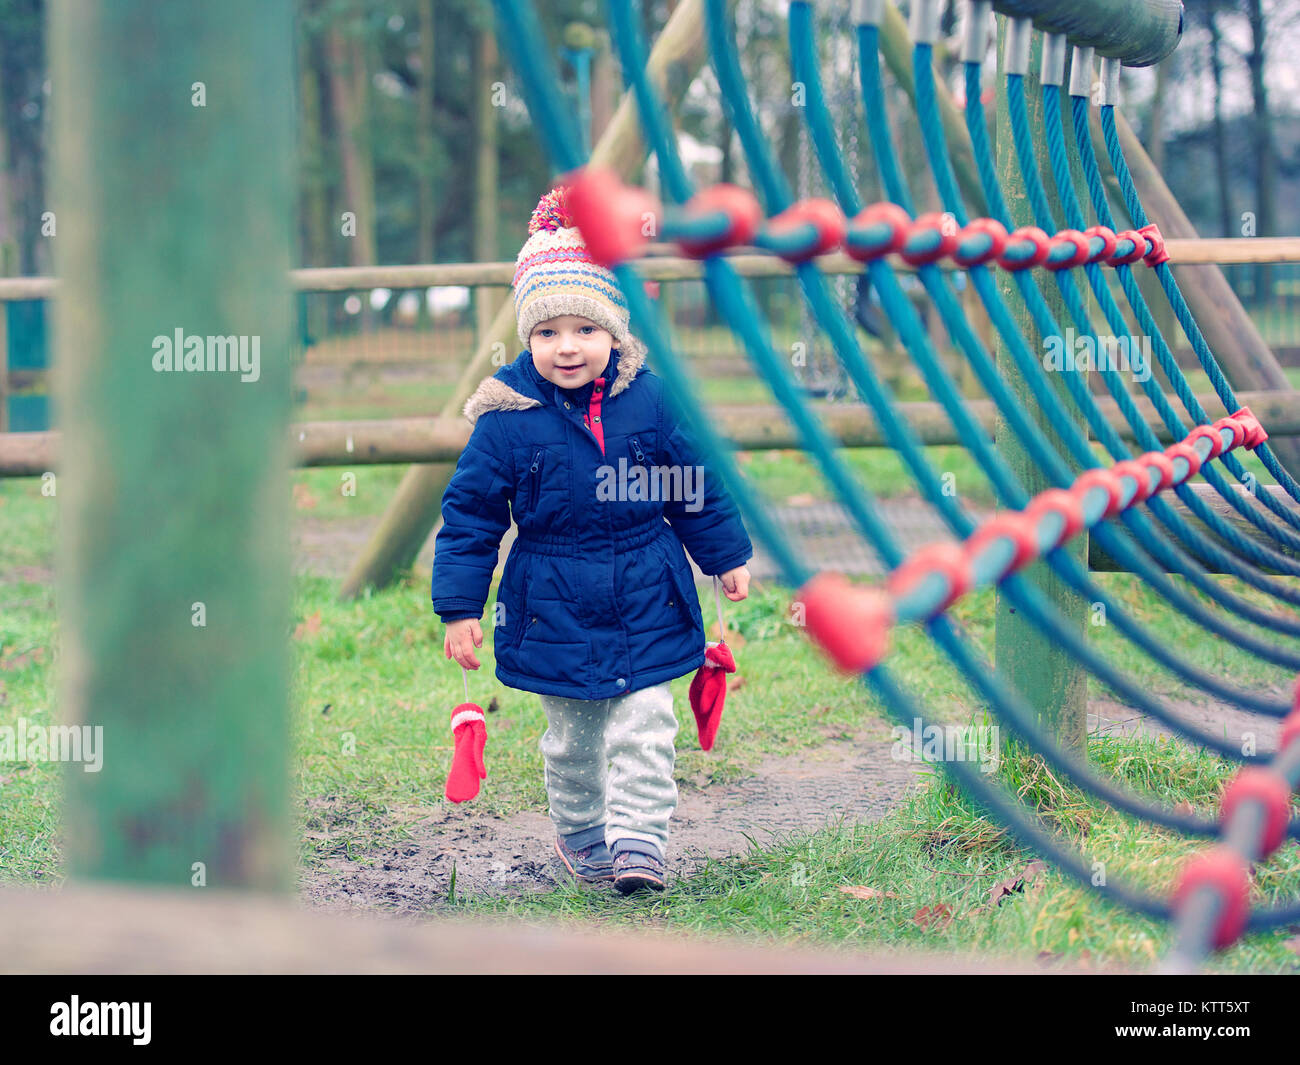 Girl walking next to a climbing frame in a playground Stock Photo